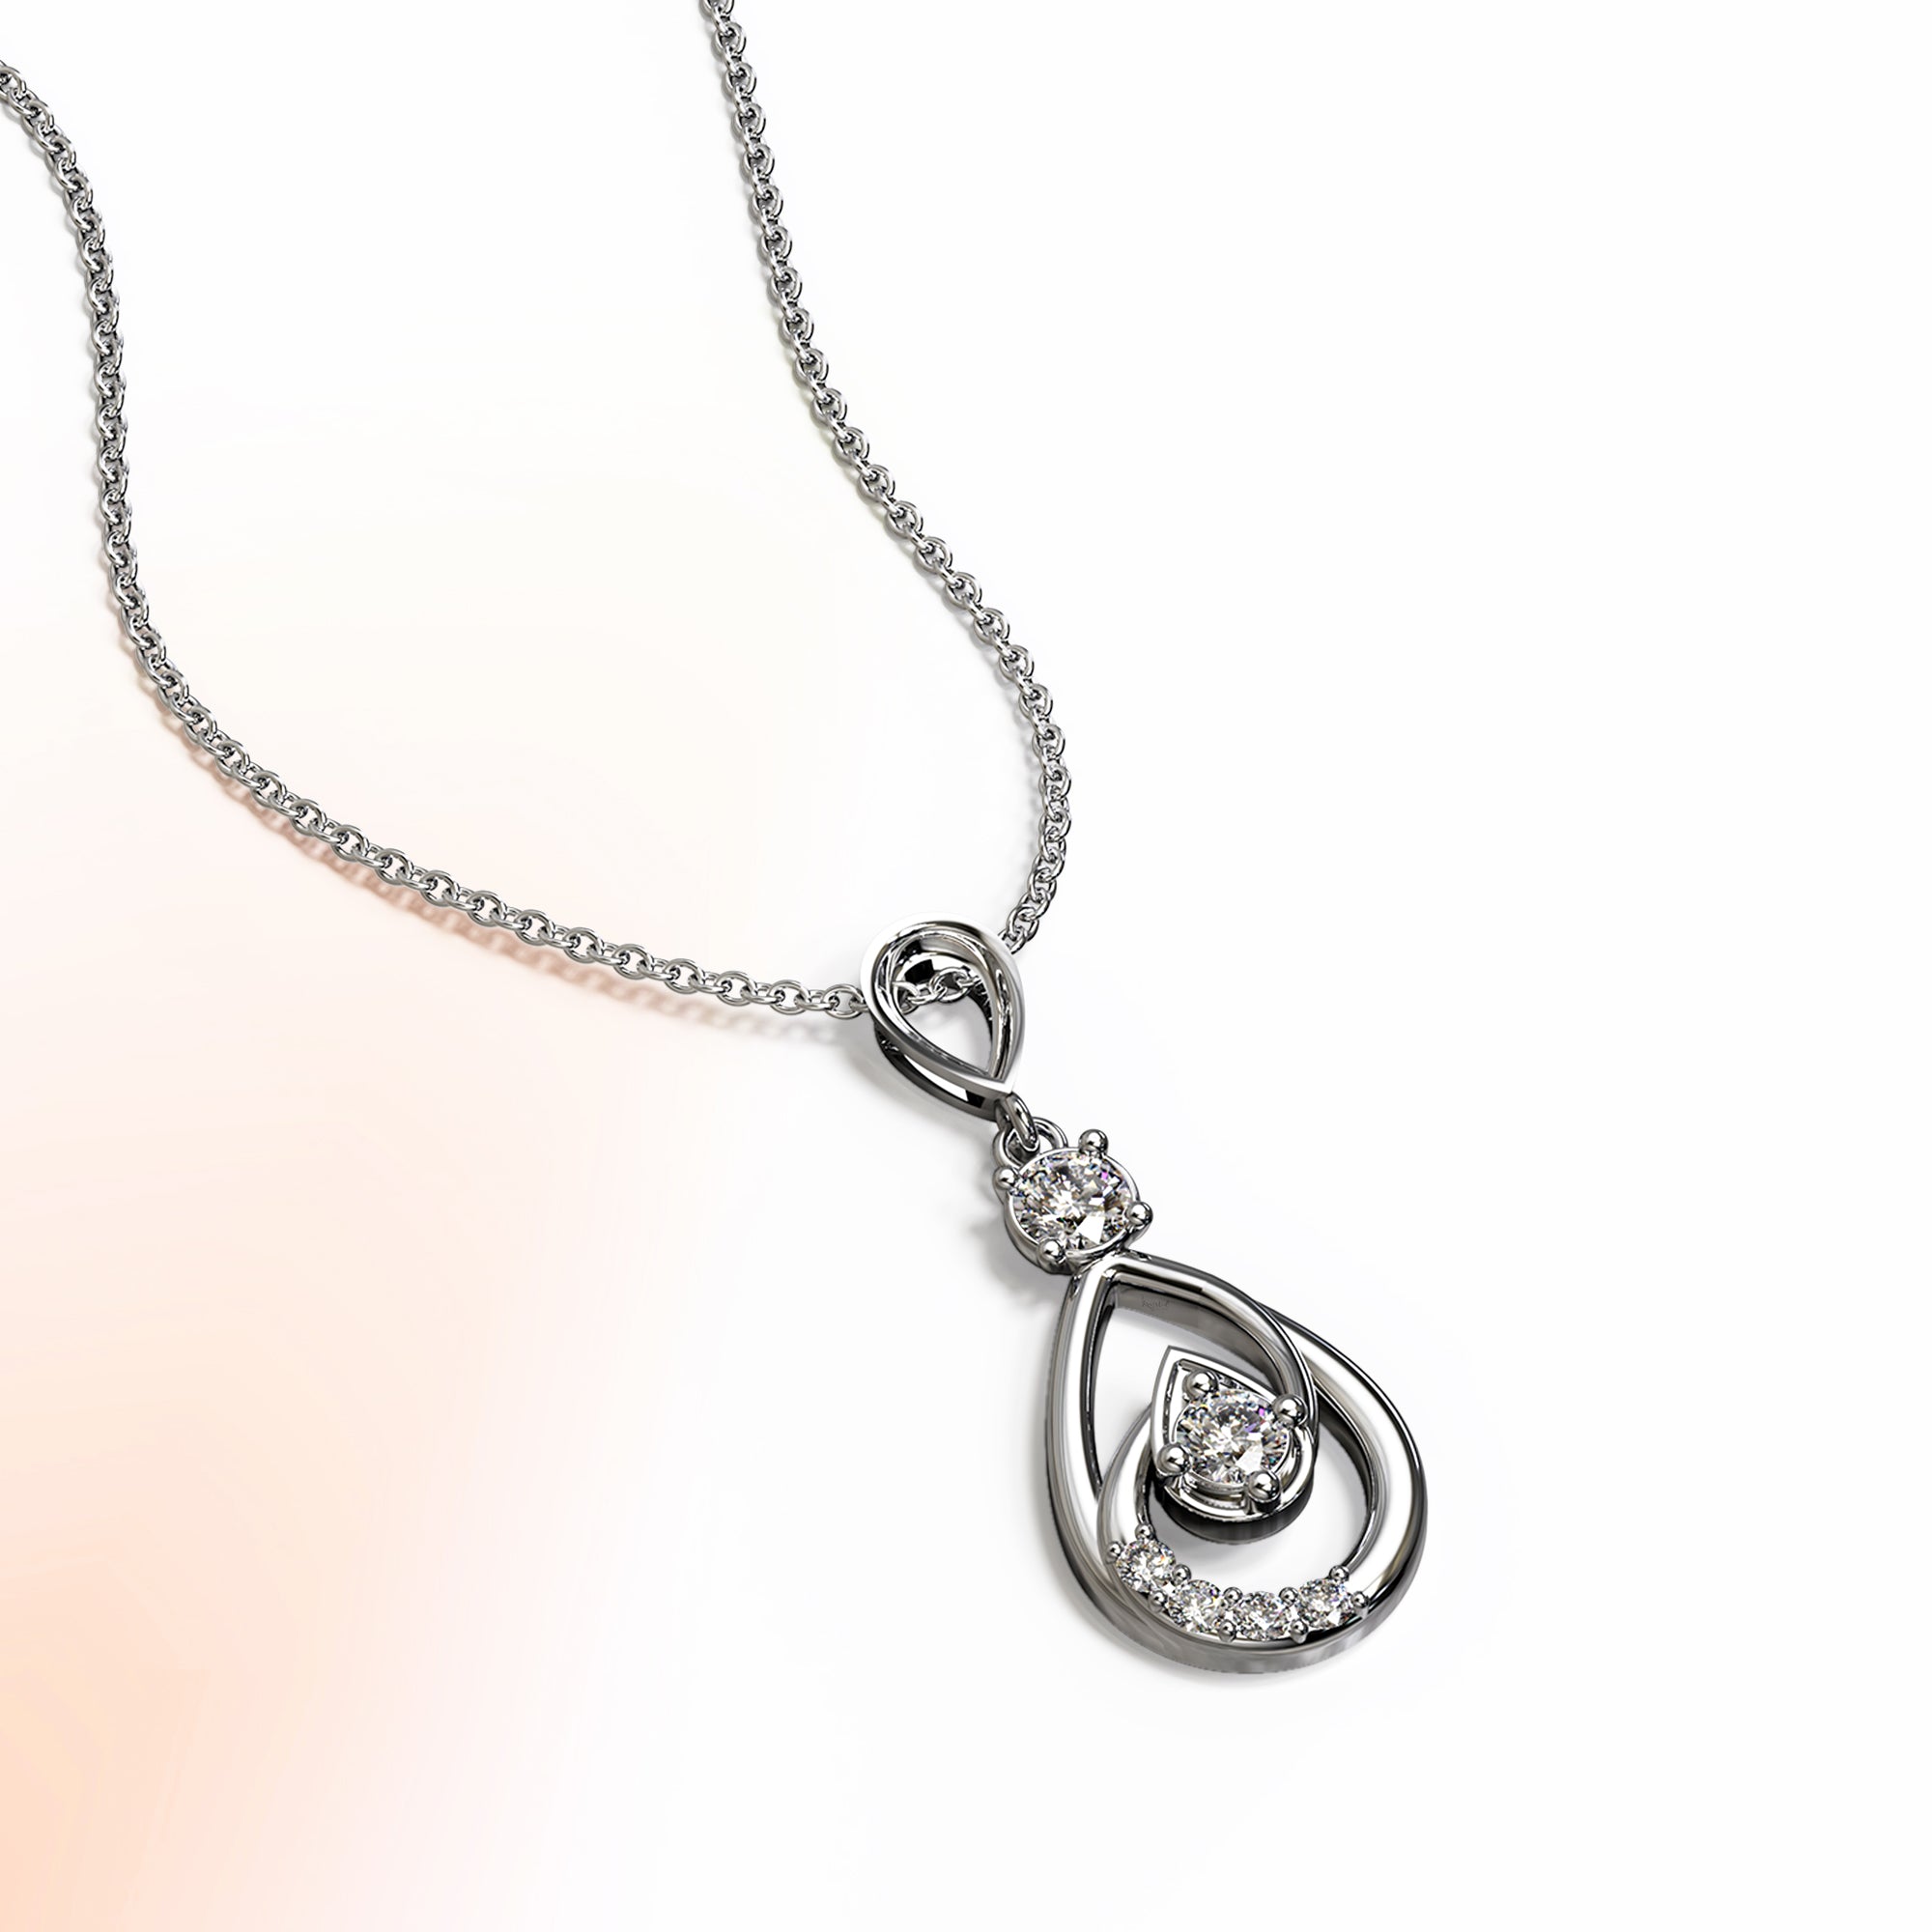 Periwinkle Teardrop Necklace Embellished with Crystals from SWAROVSKI® in White Gold